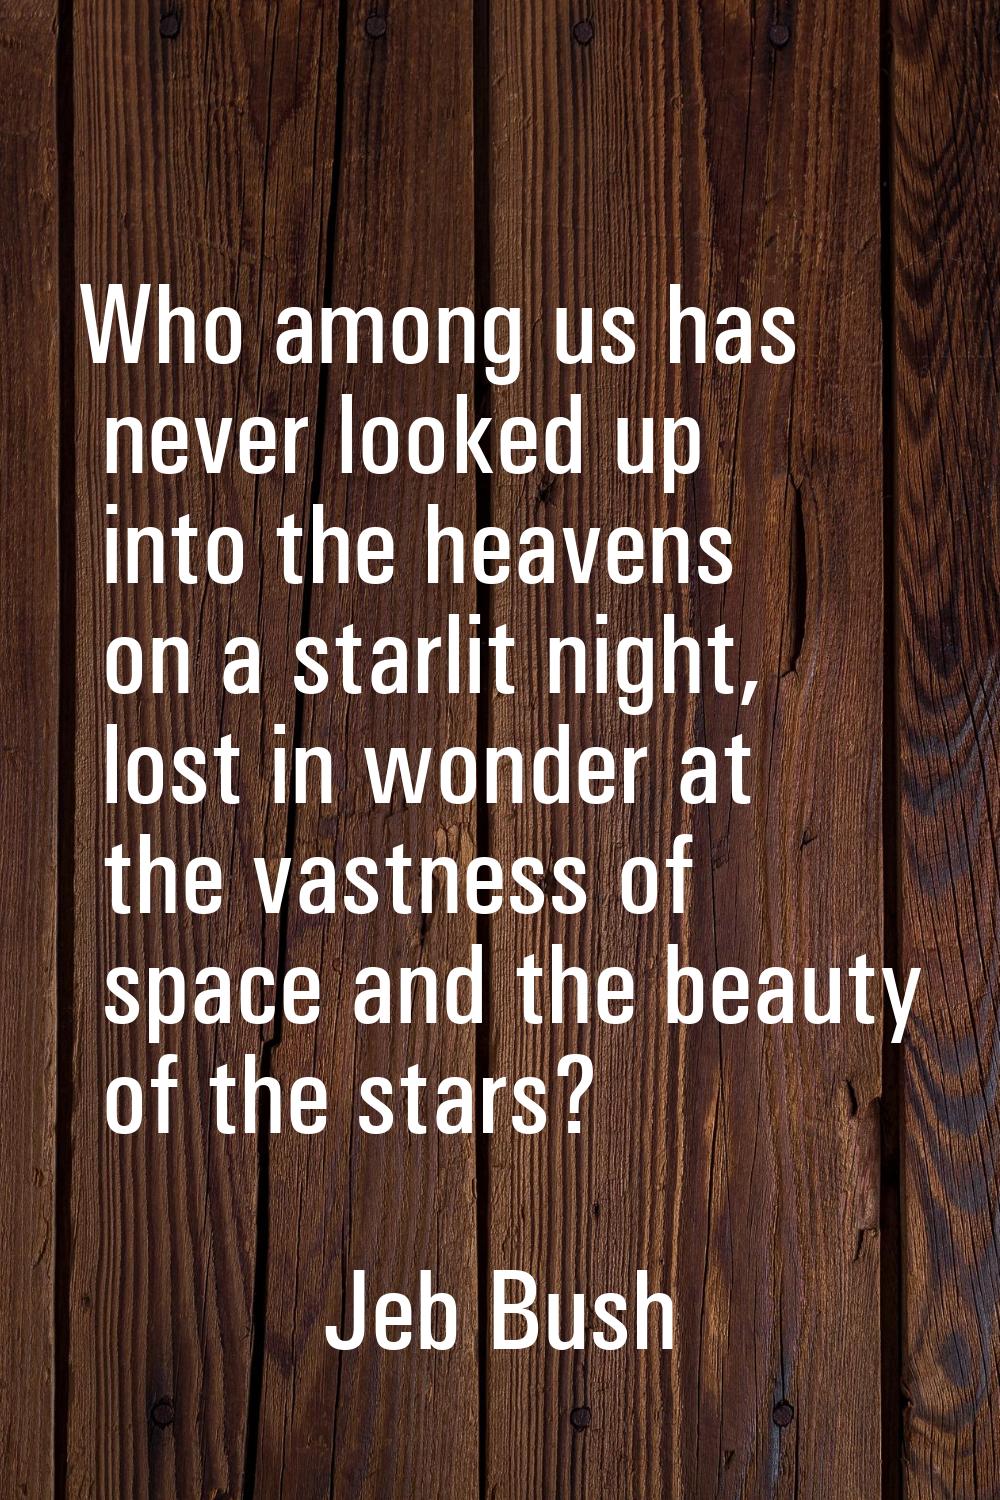 Who among us has never looked up into the heavens on a starlit night, lost in wonder at the vastnes